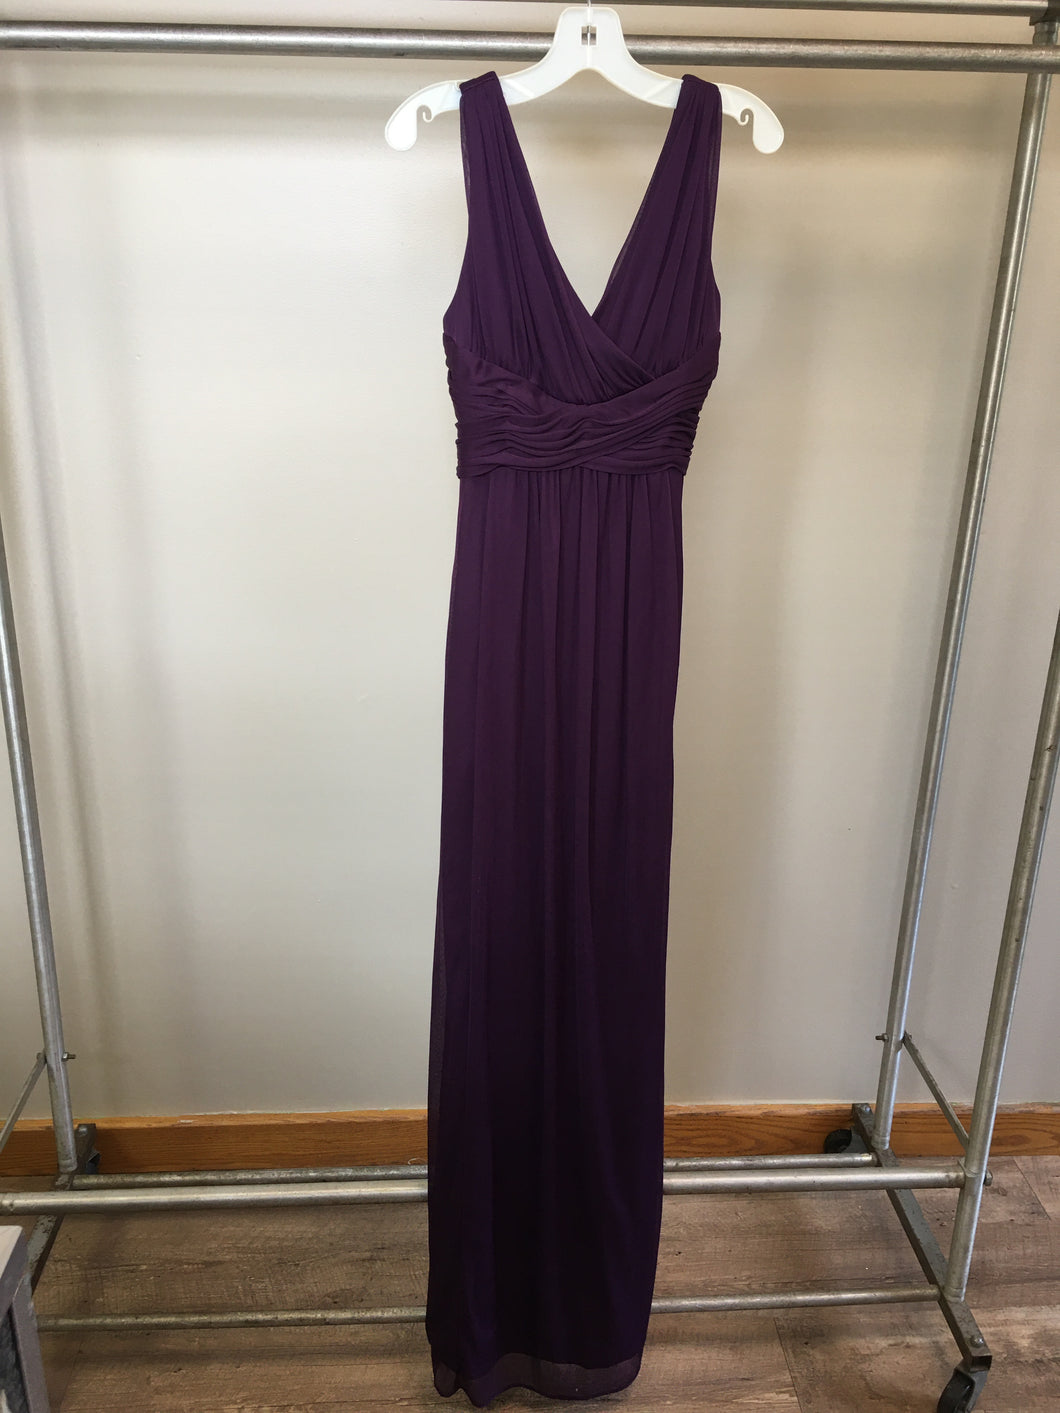 ABCD100-AF  David's Bridal Plum Gown size 16 youth or 0-2 adult